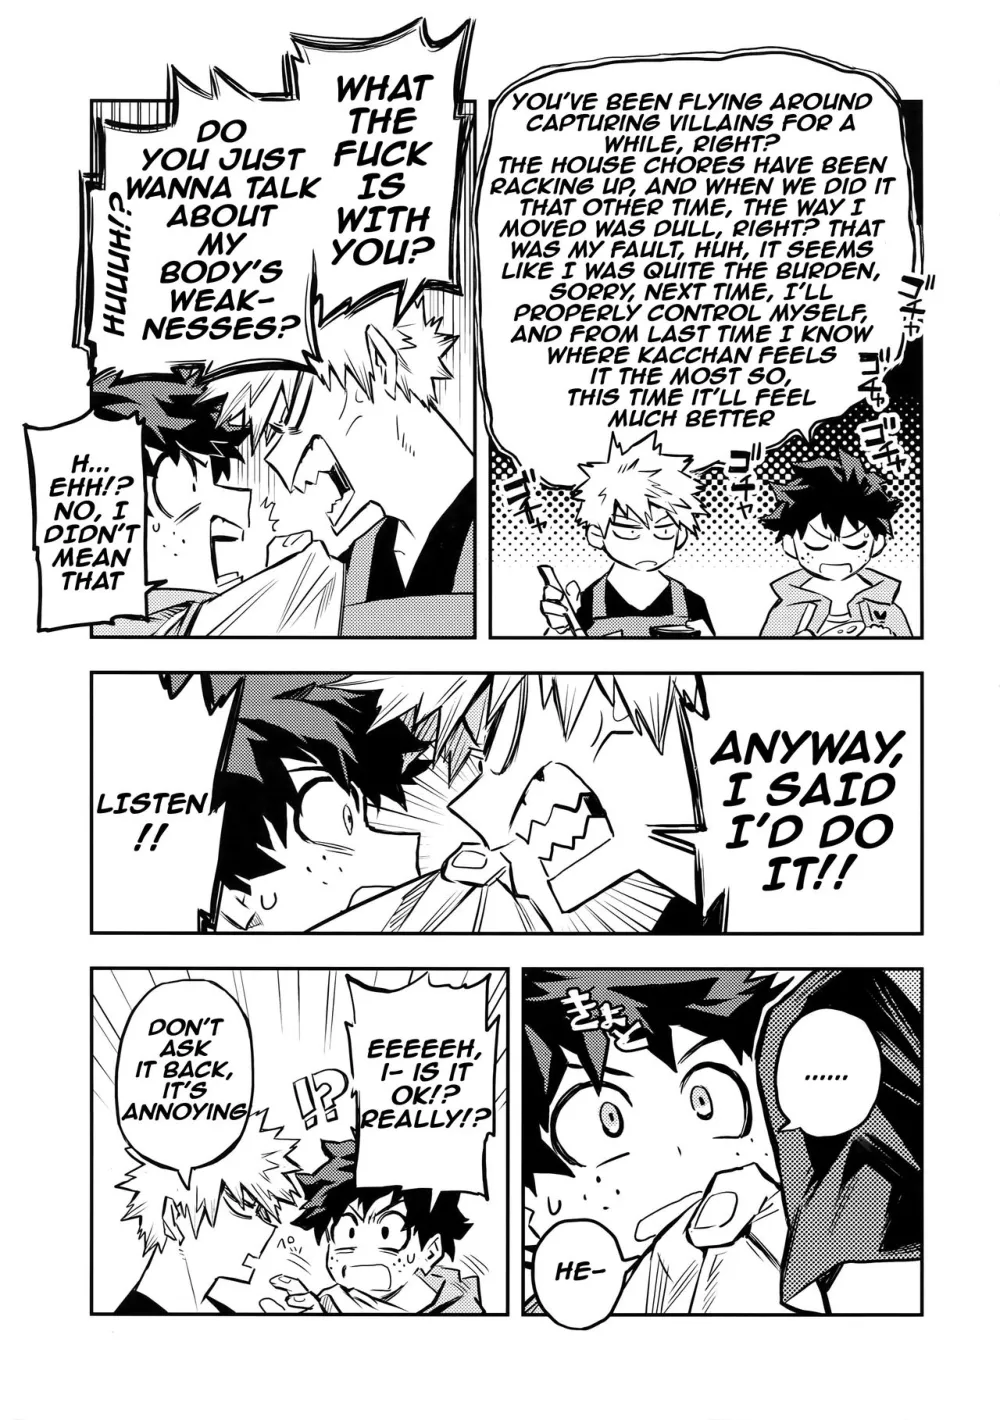 The Battle Between Sick Kacchan and Me - Page 4